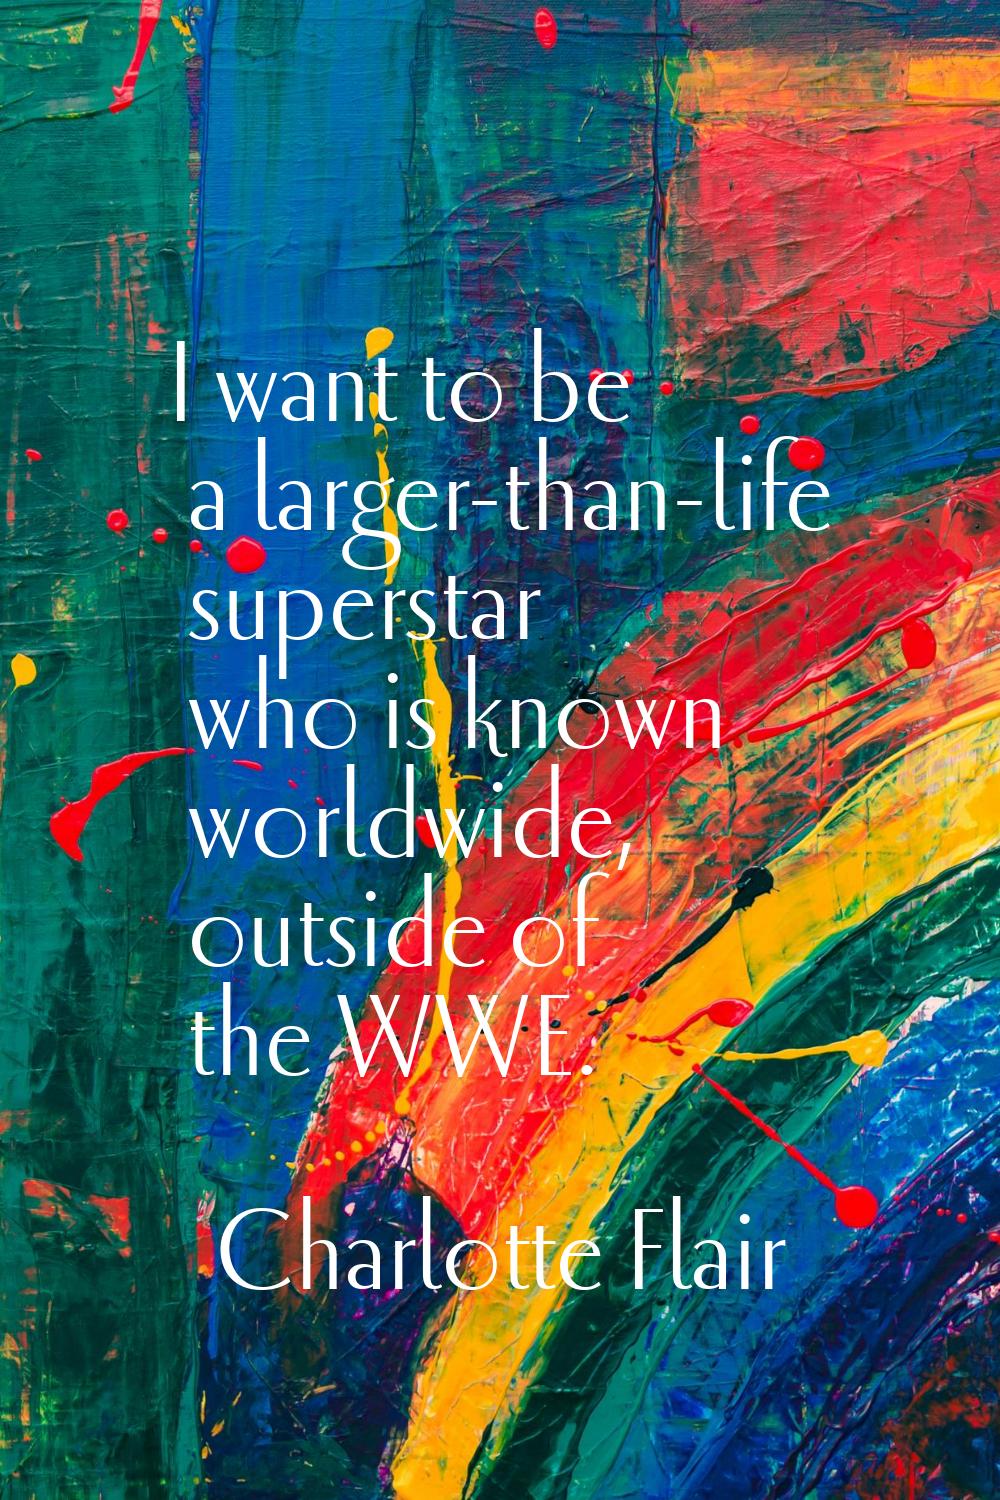 I want to be a larger-than-life superstar who is known worldwide, outside of the WWE.